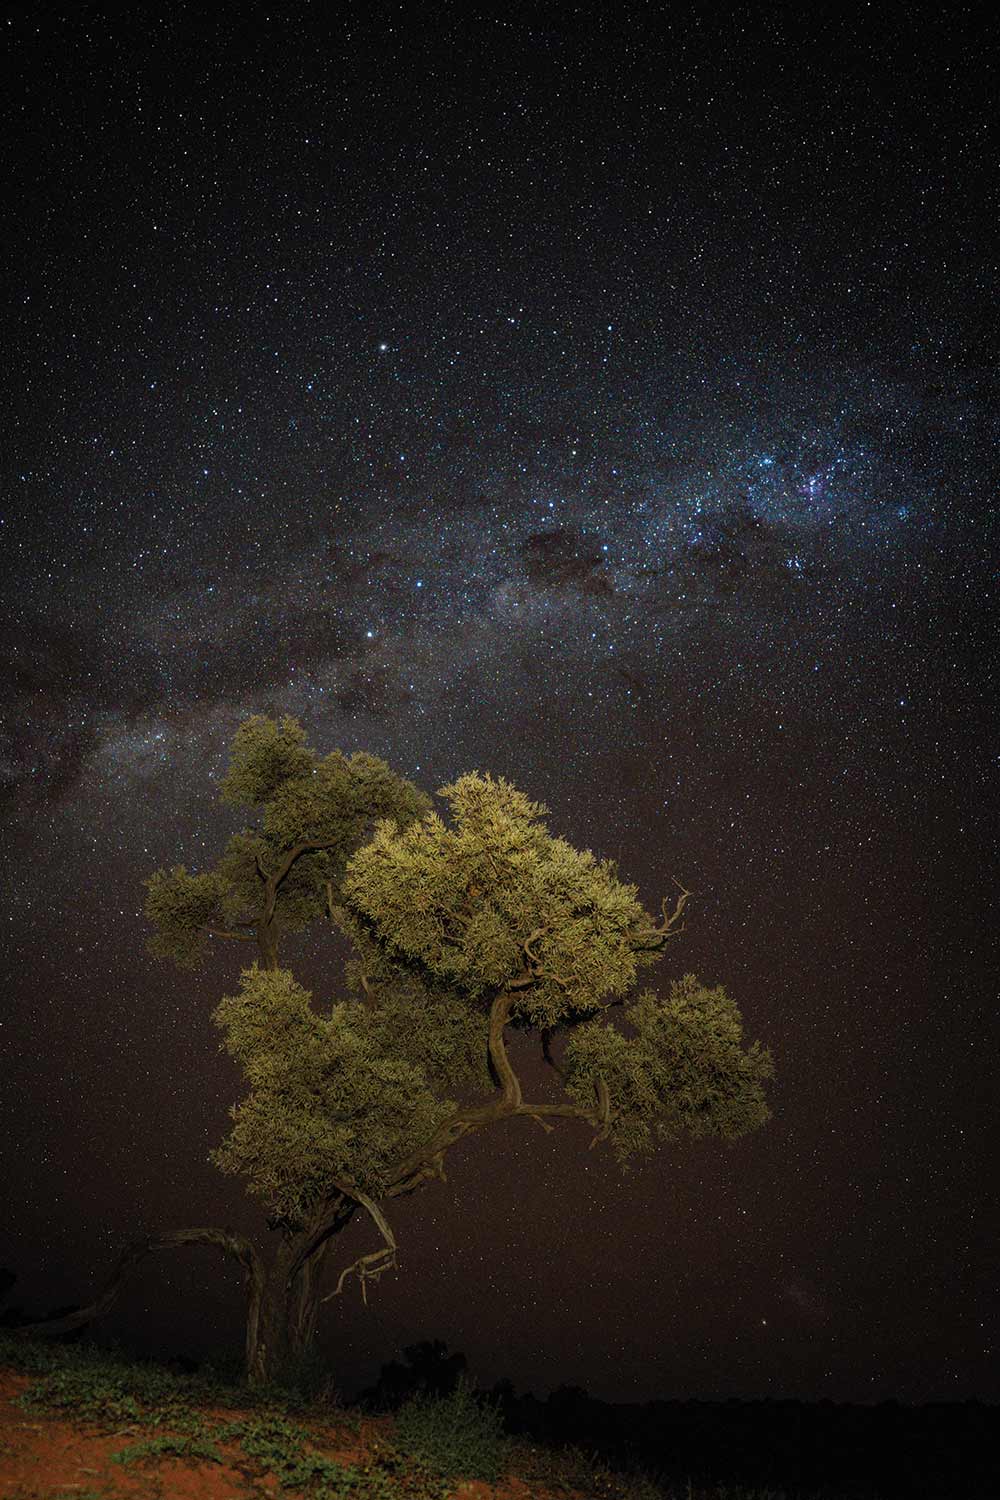 The Southern Hemisphere stars put on a mighty show in the desert.